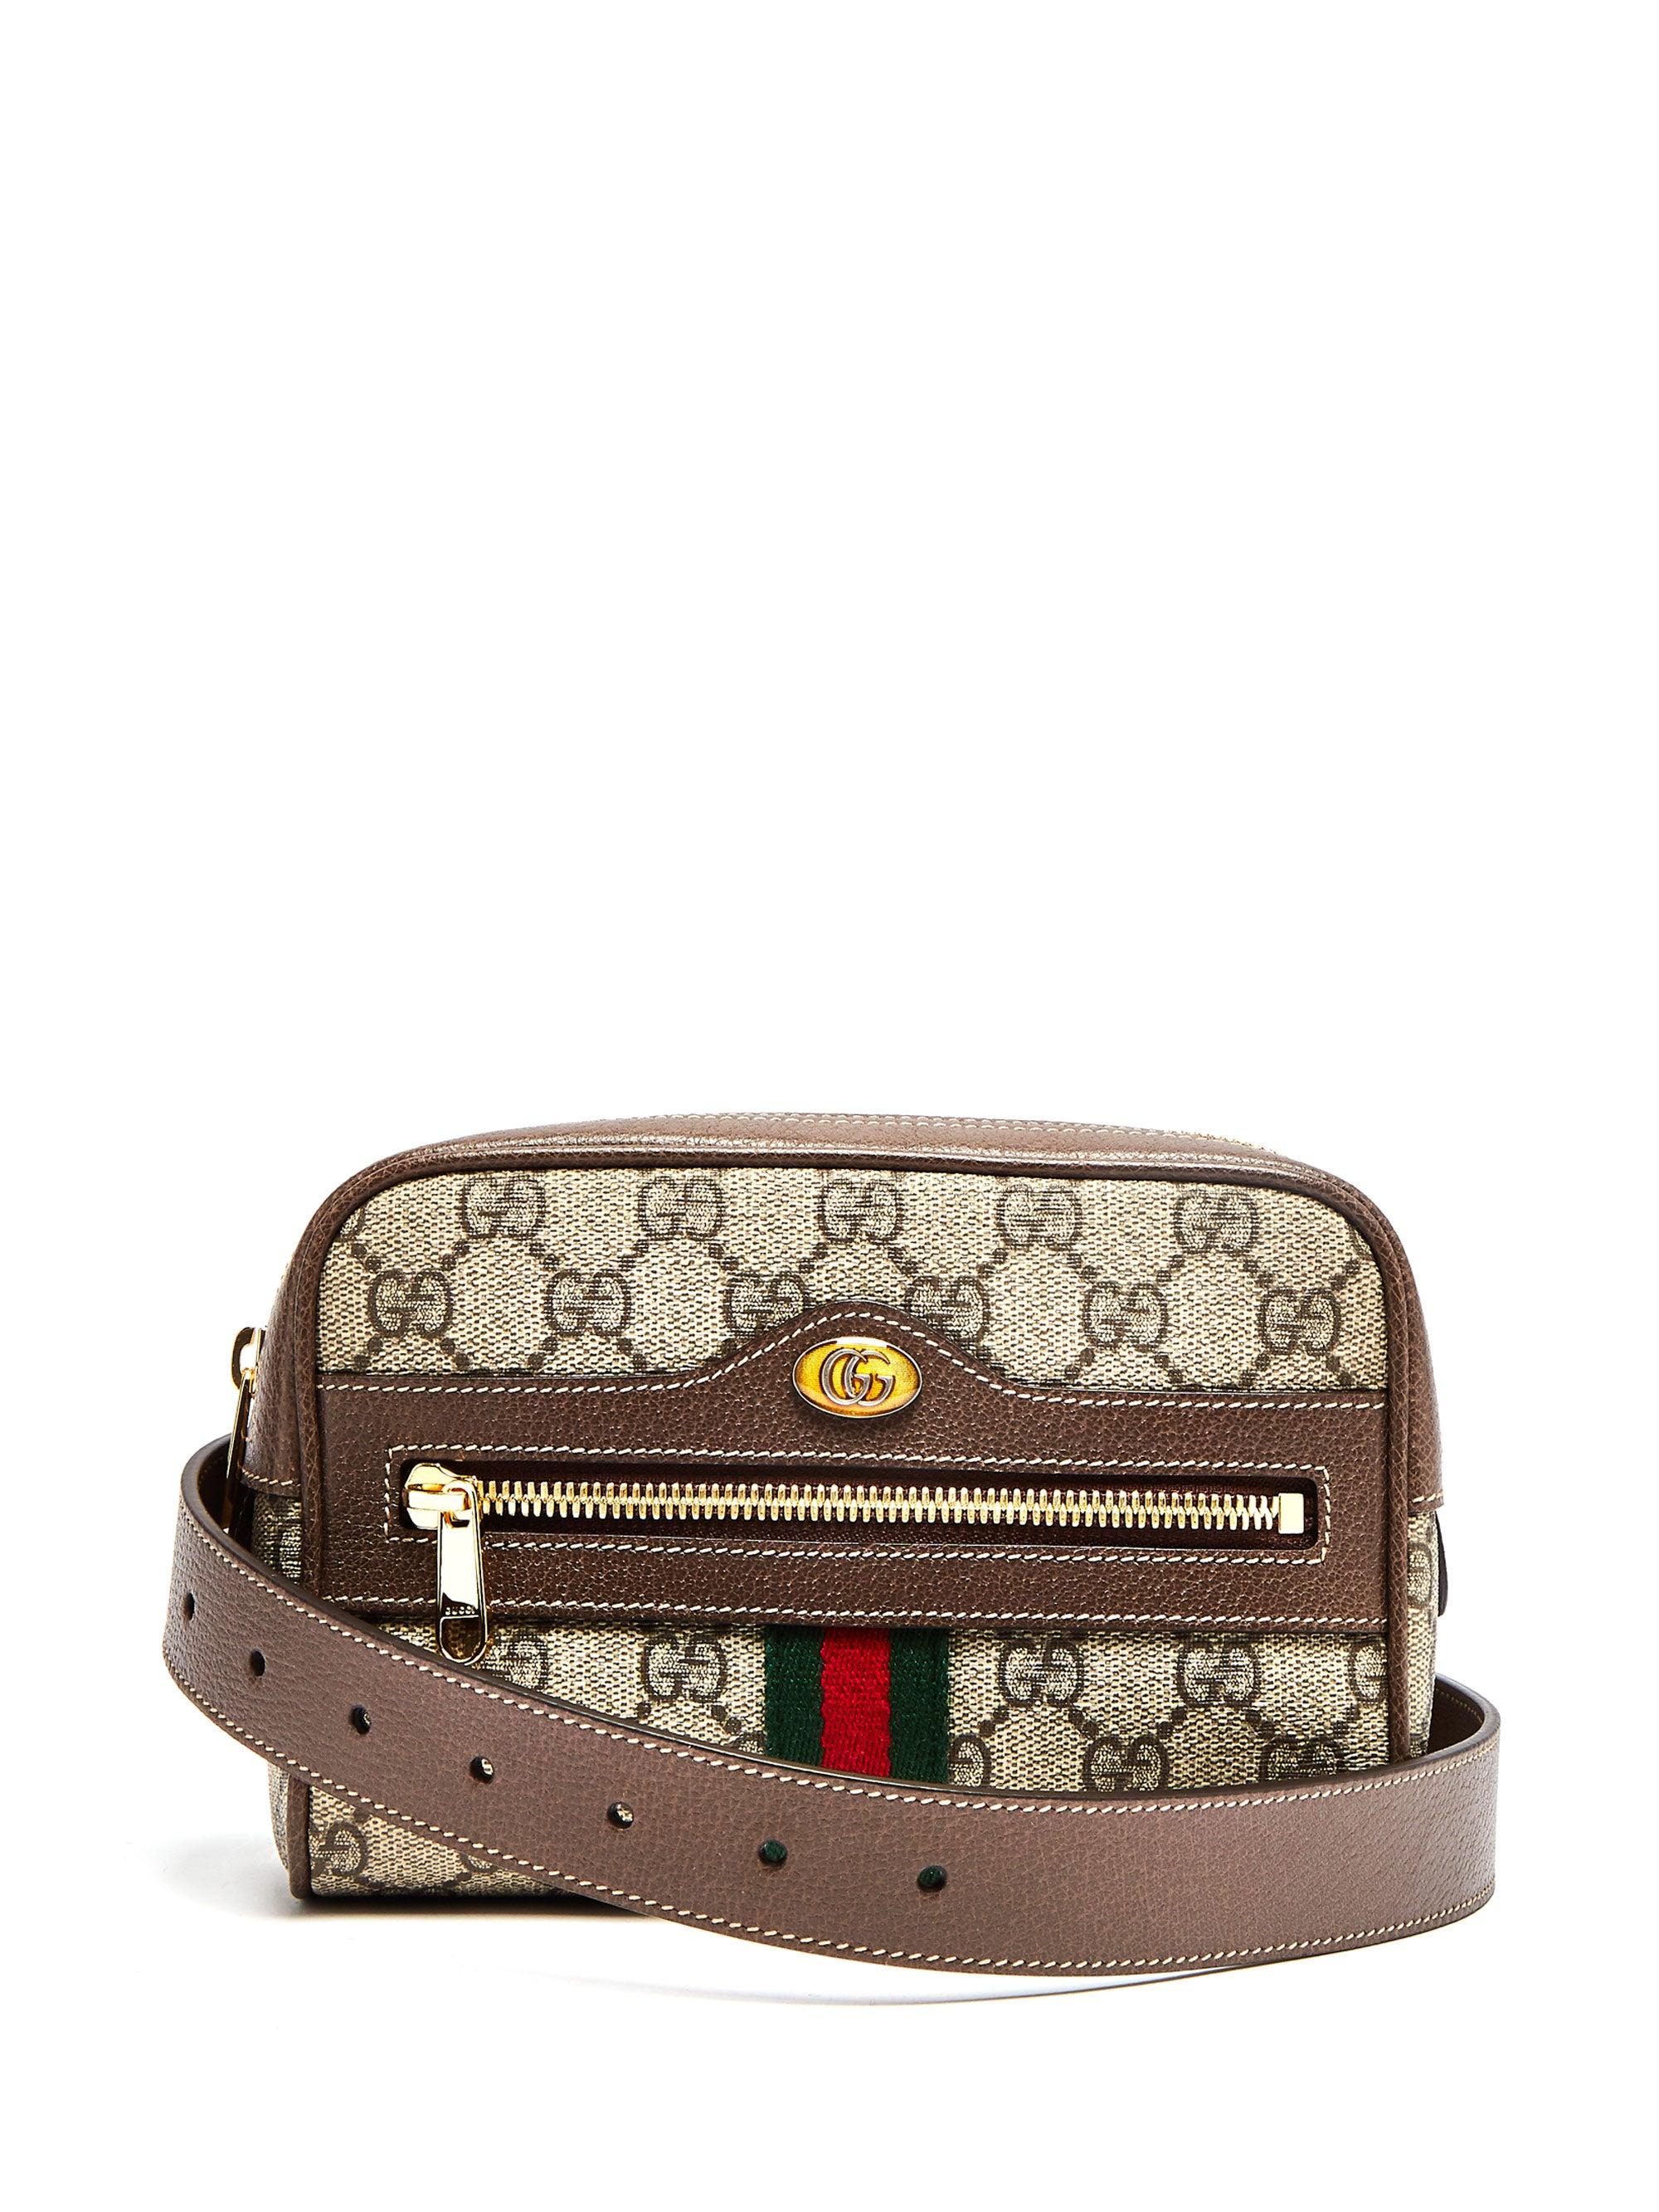 Gucci Canvas Ophidia GG Supreme Mini Bag in Taupe (Brown) - Save 